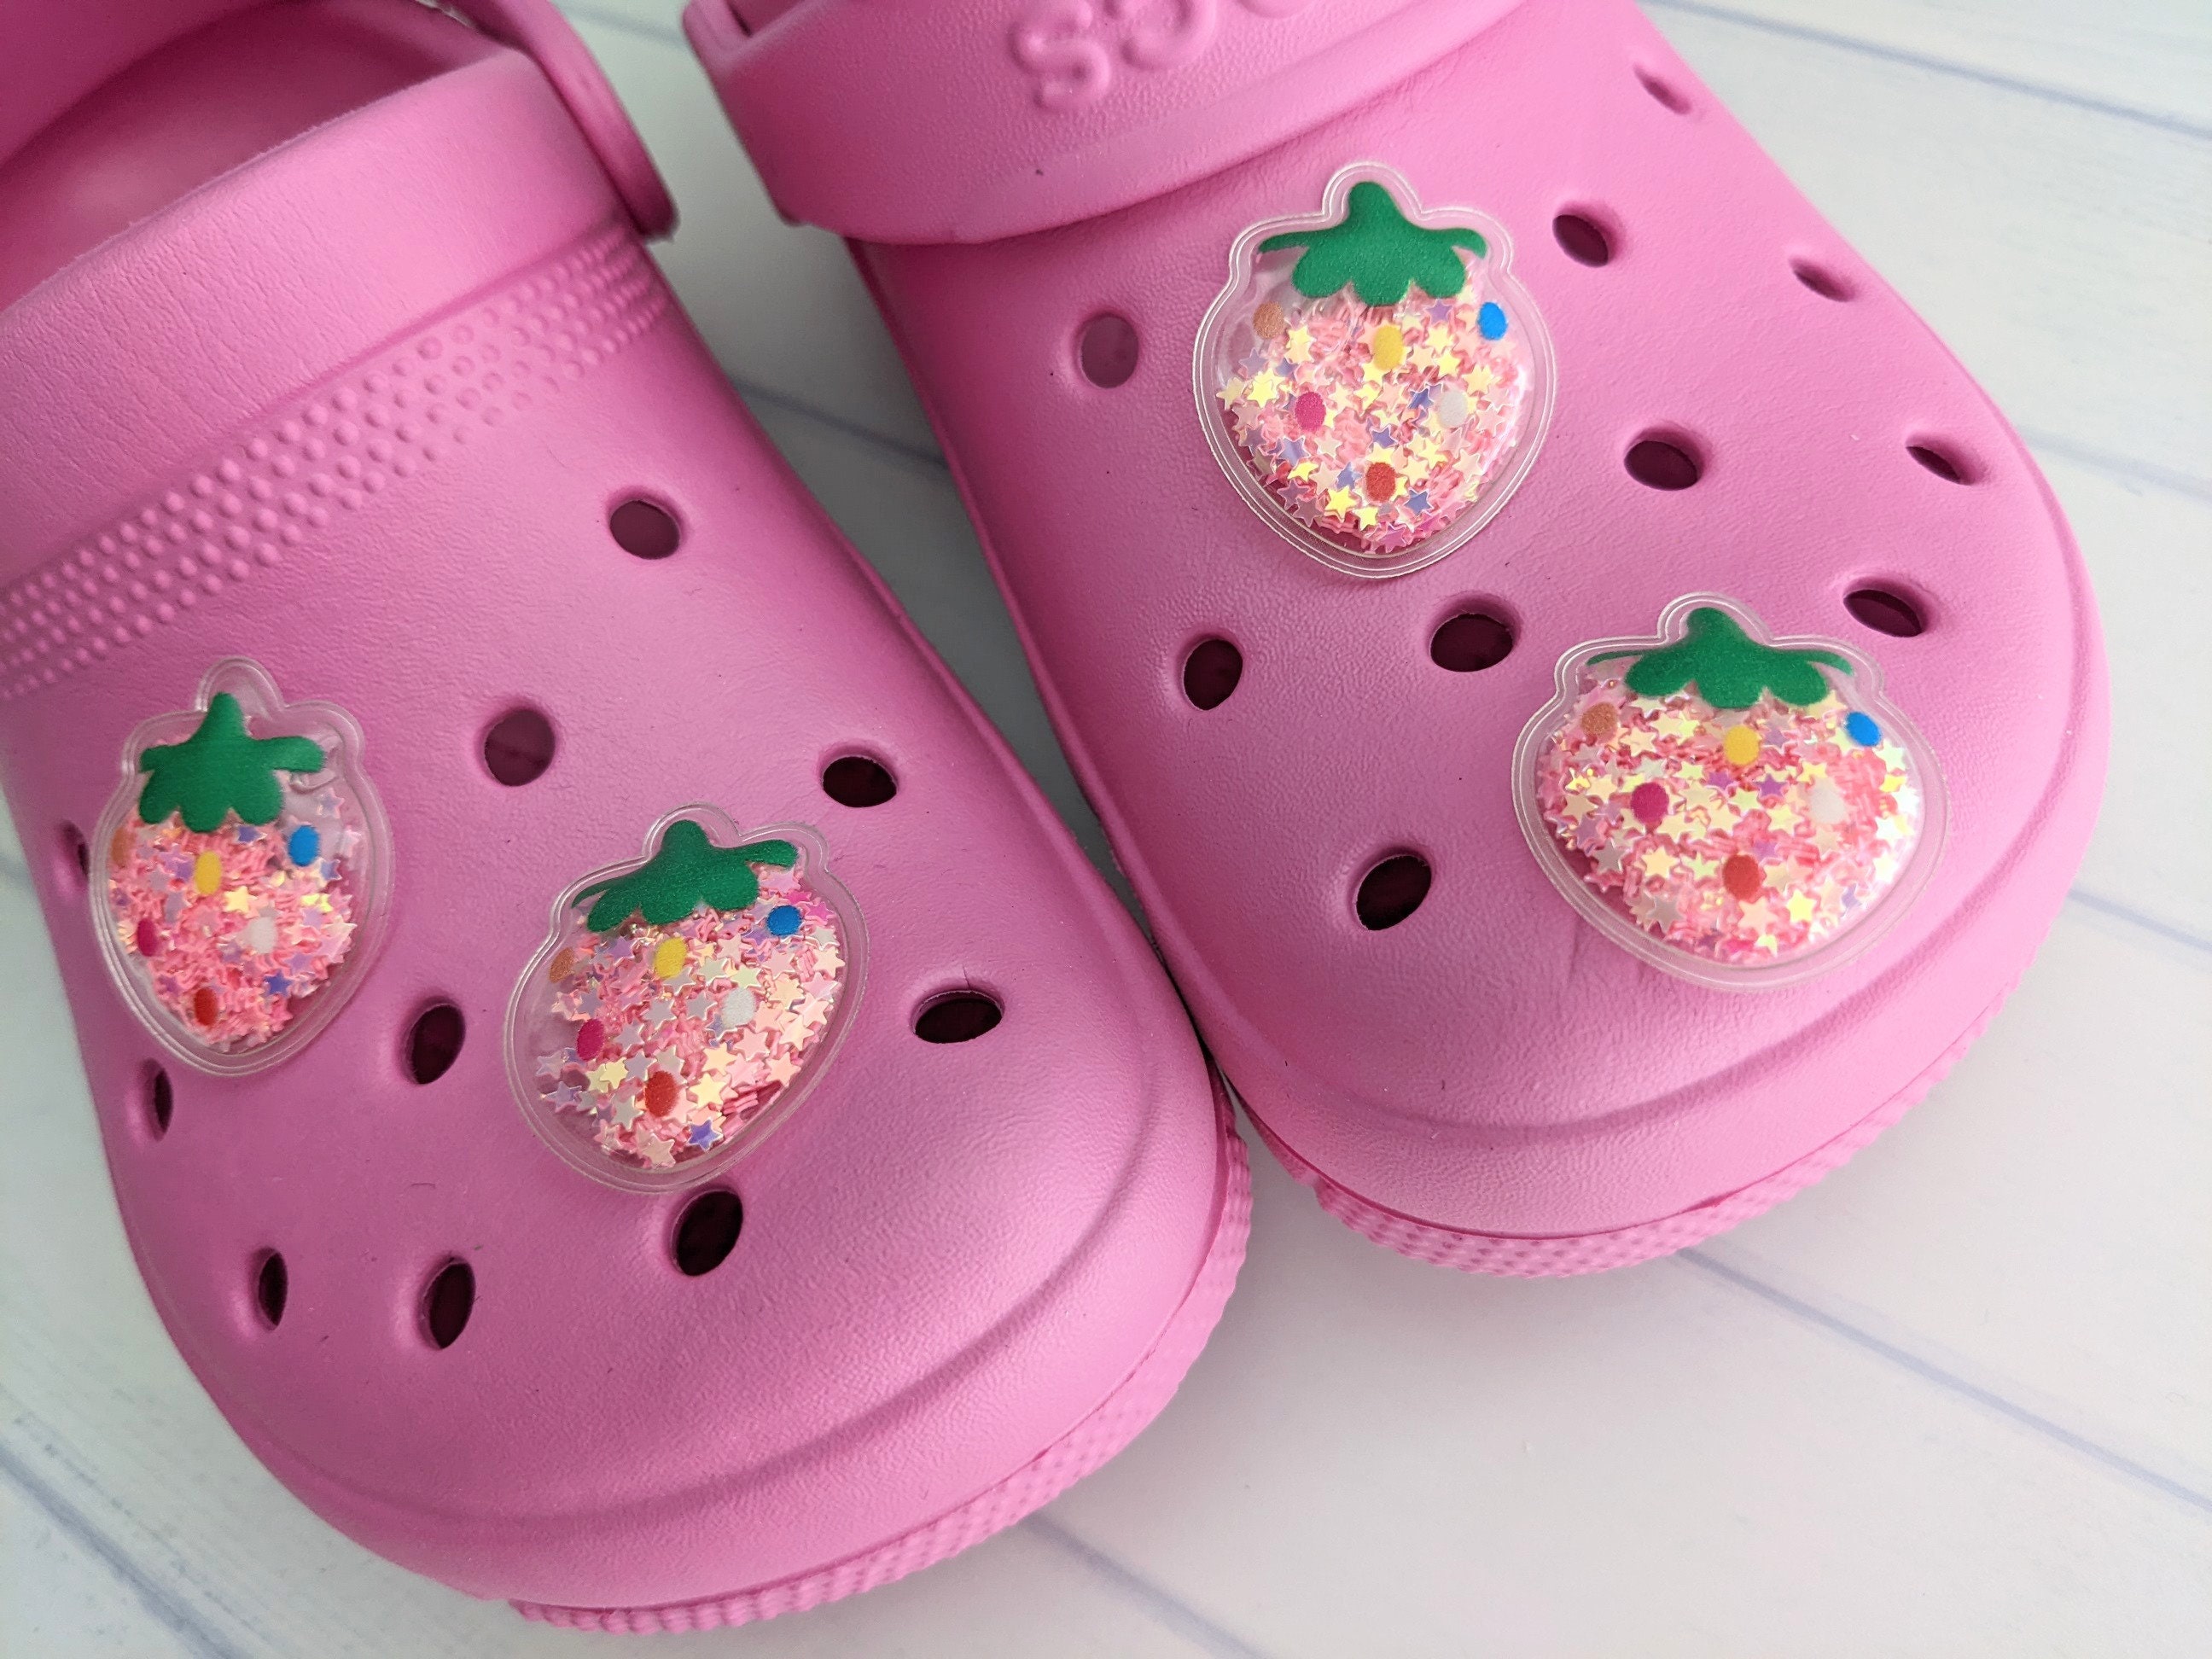 Bling charms on pink crocs… #croccharmbusiness #soprettycharms